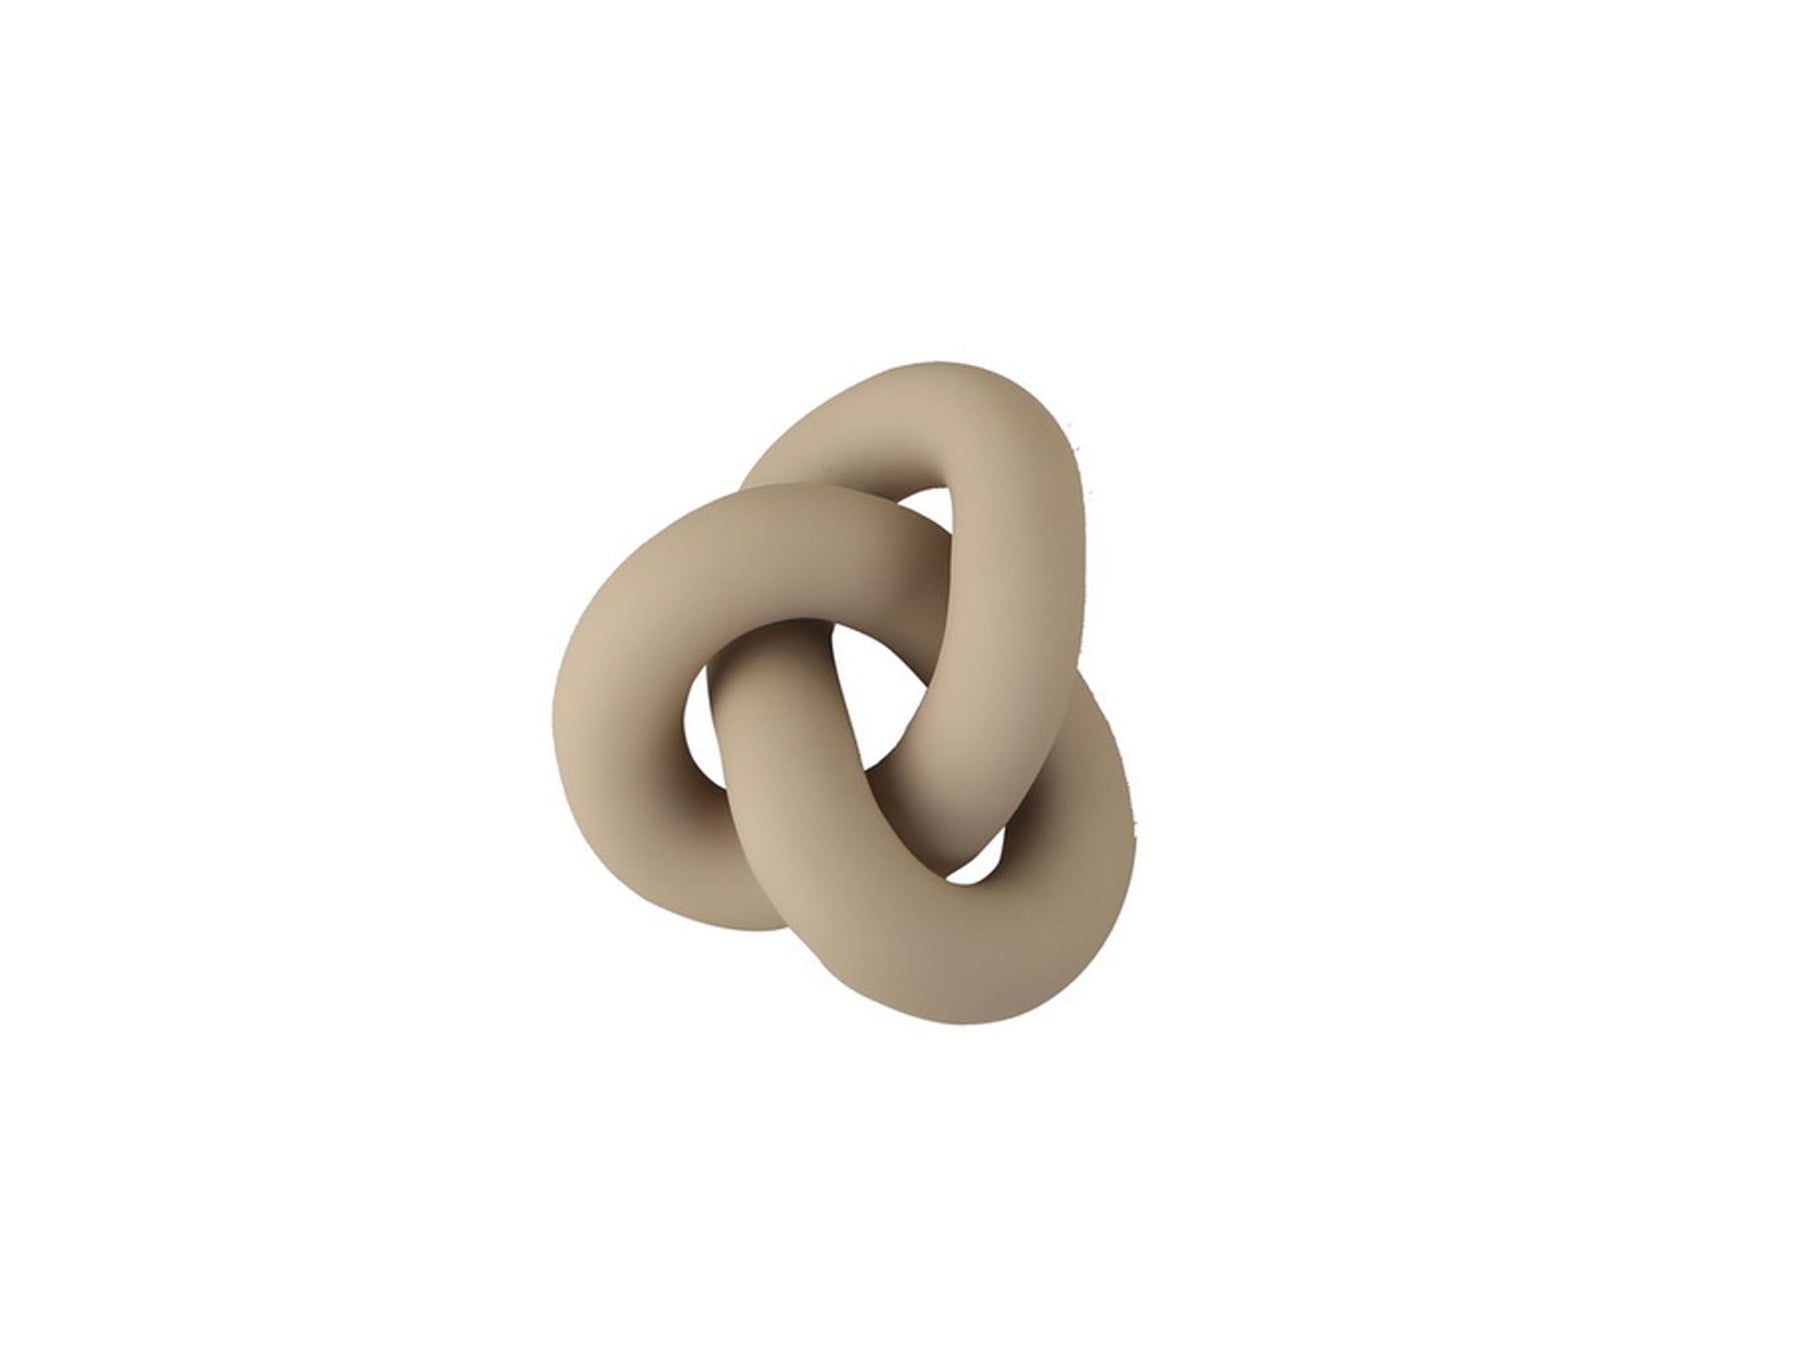 Cooee Design Knot Table